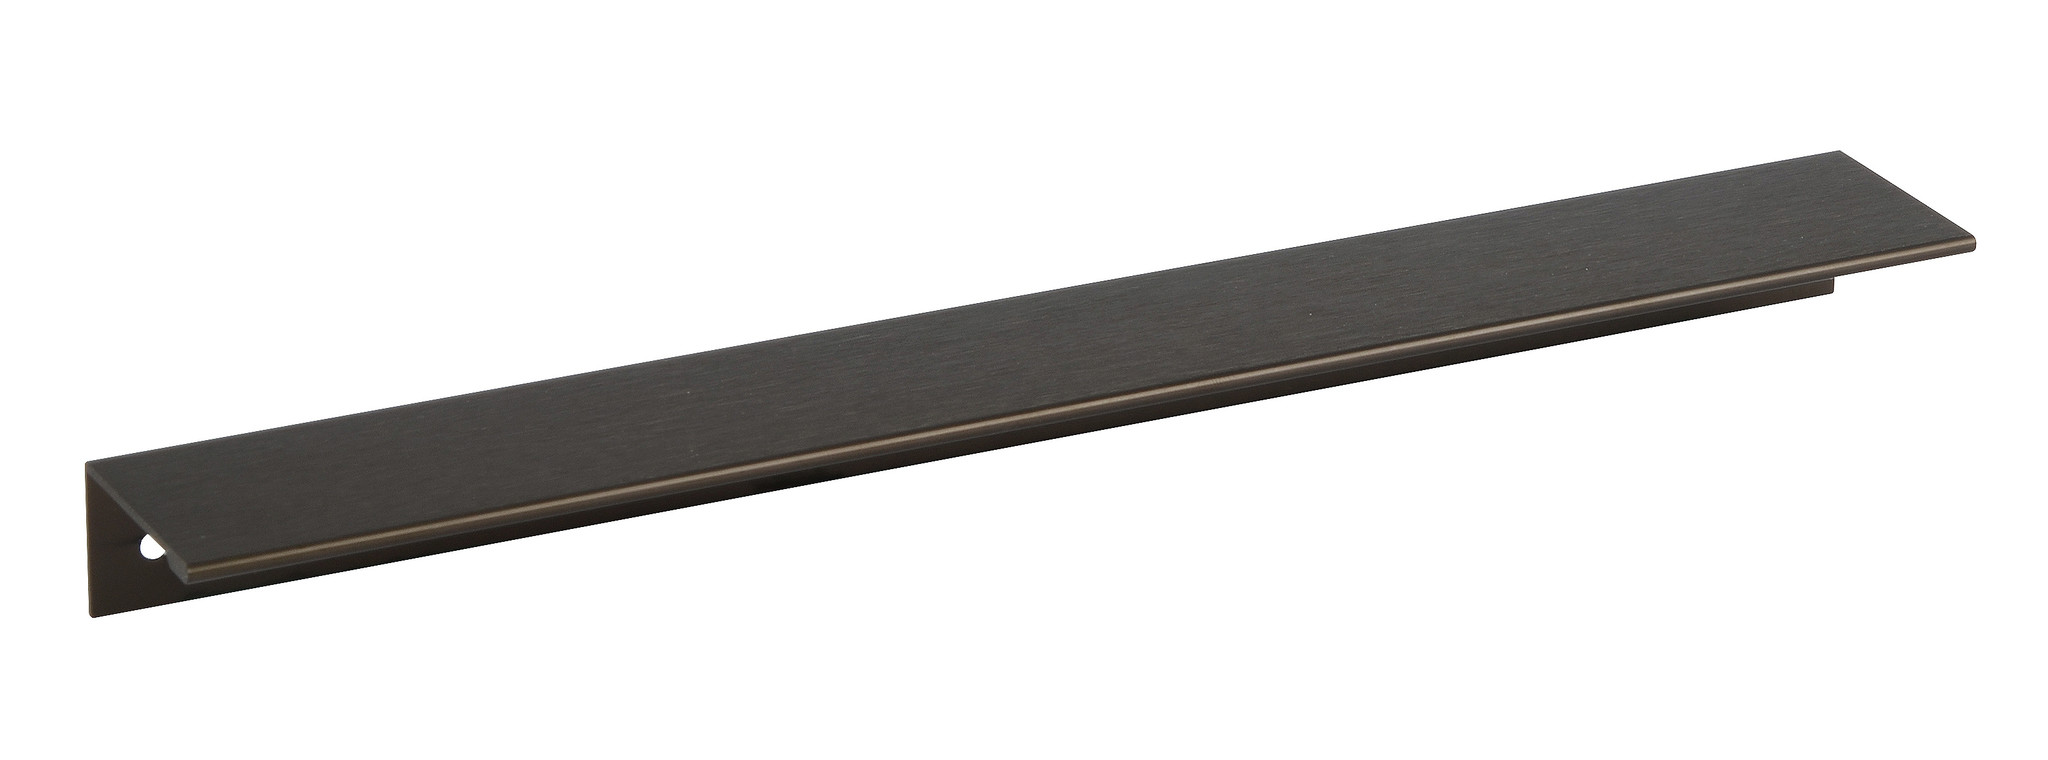 Are you looking for a dark bronze brushed corner handle? - Sharp price ...